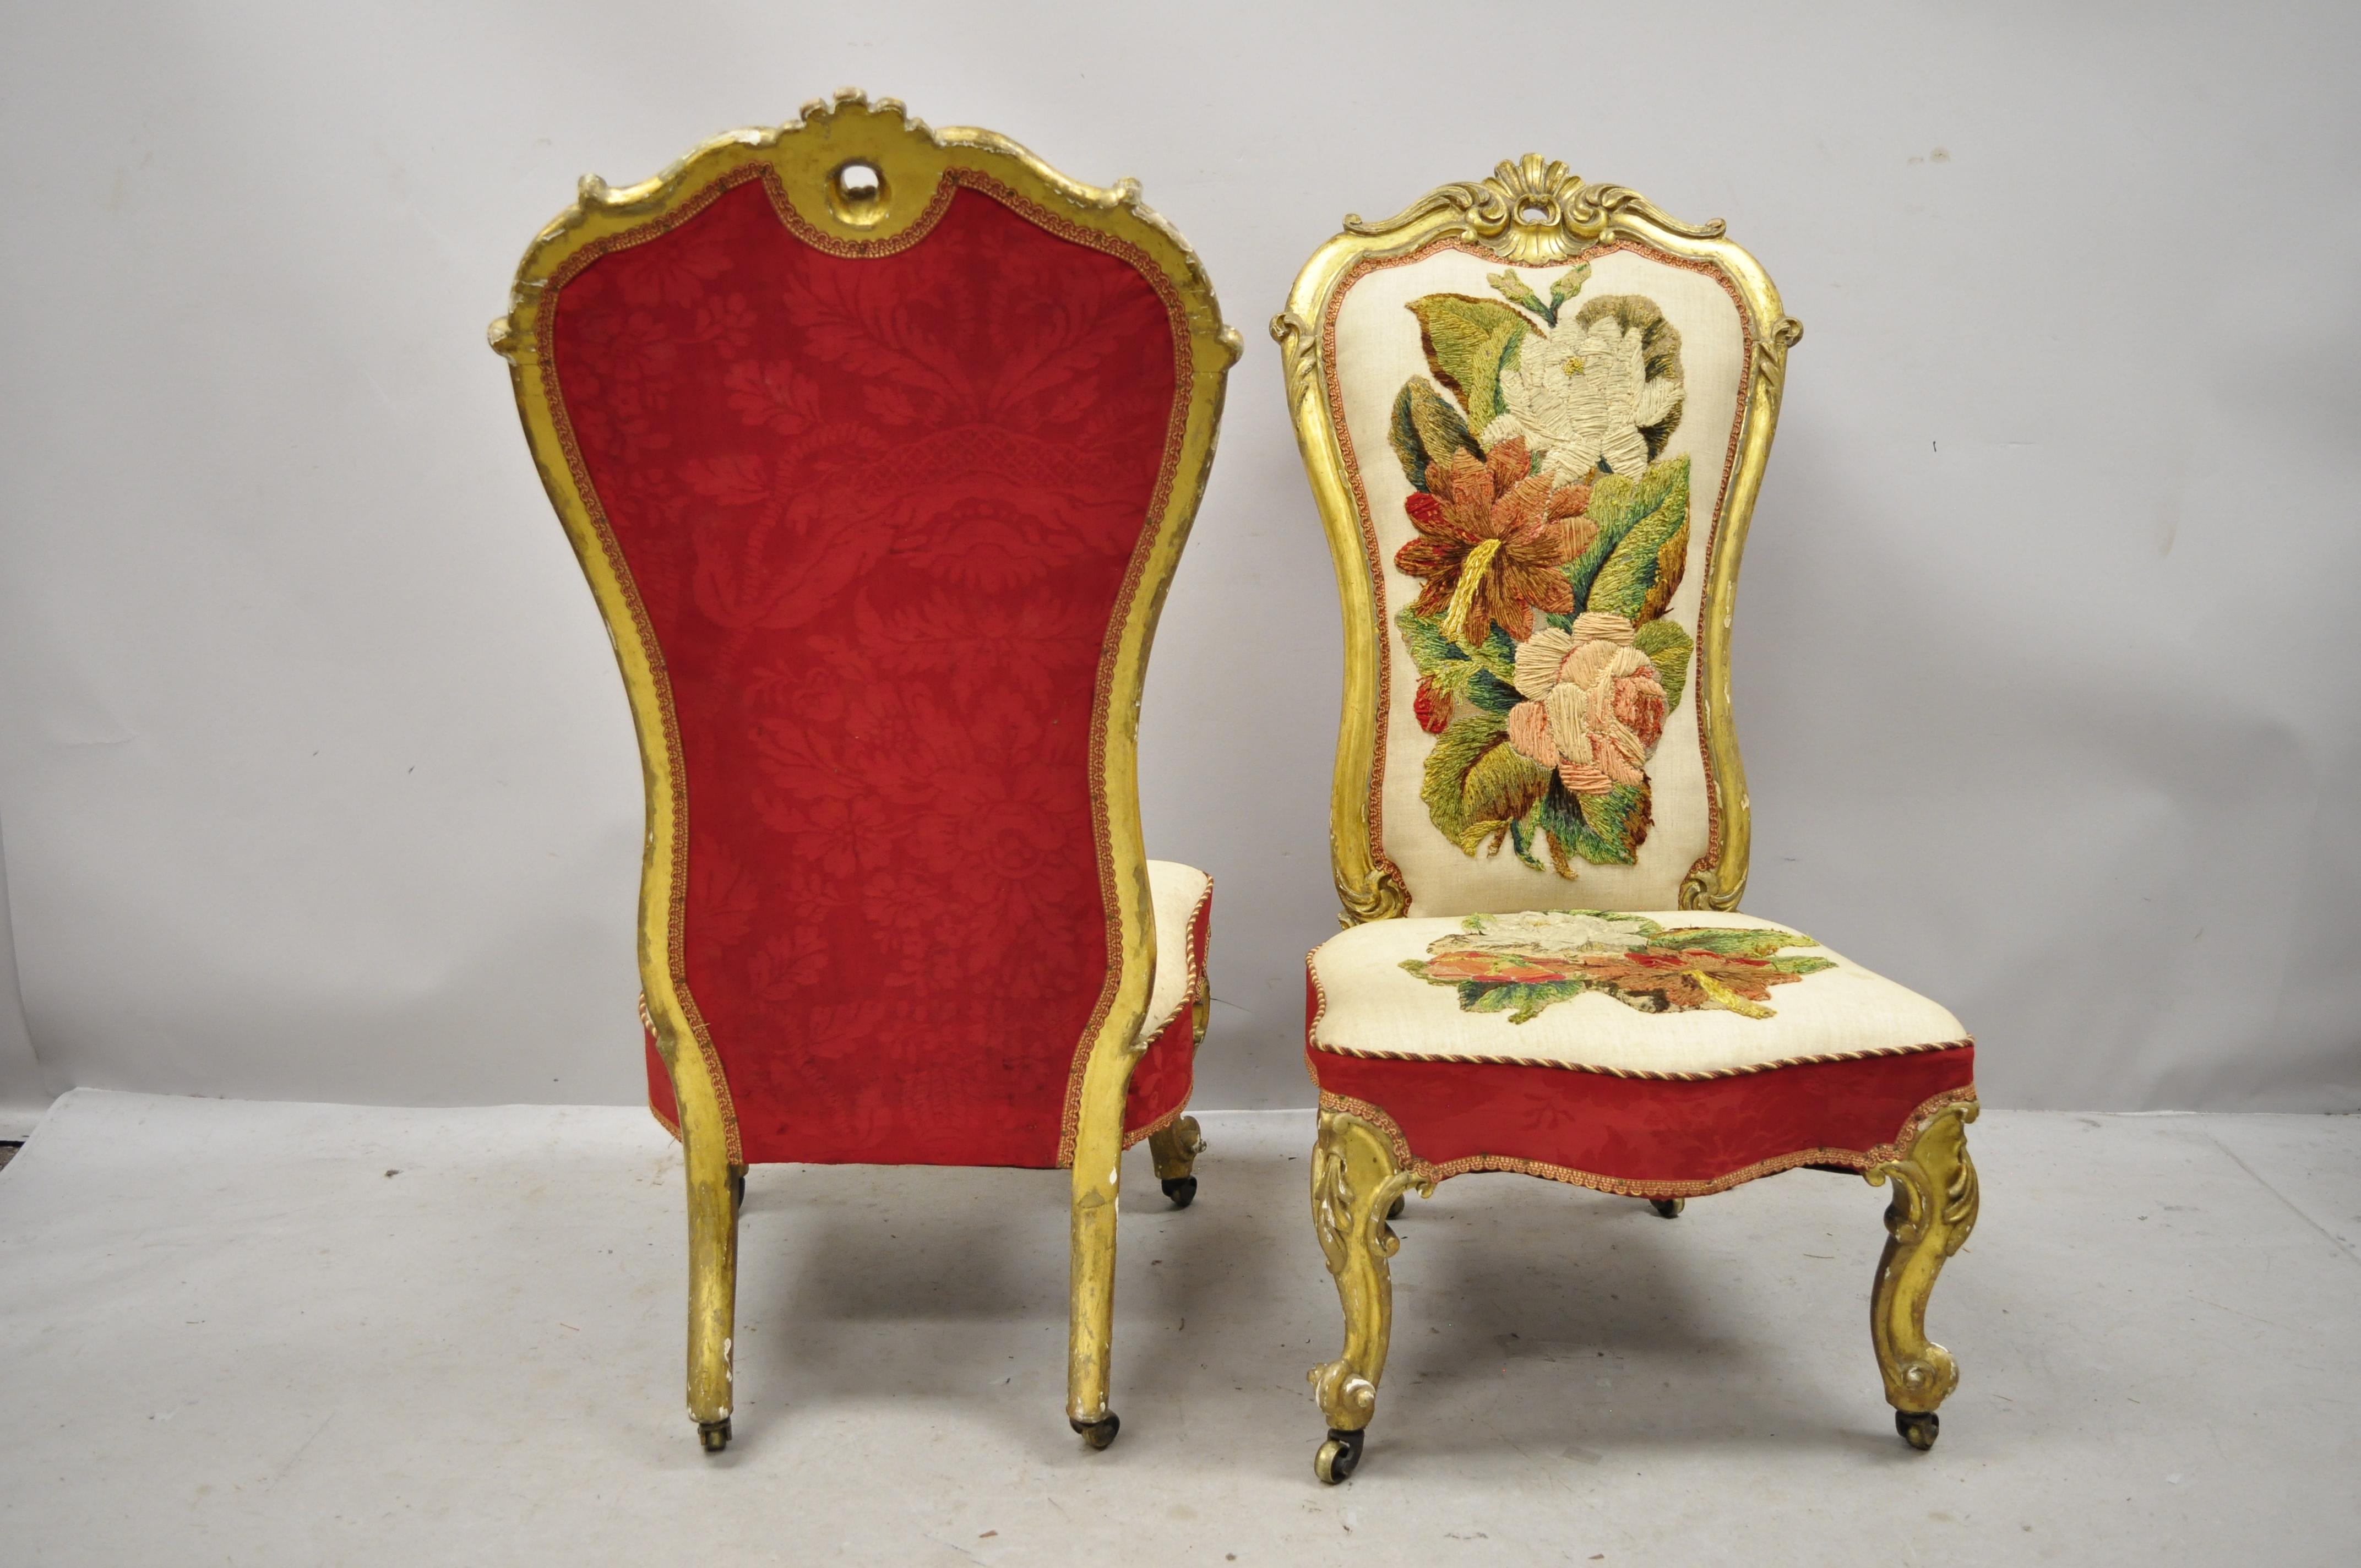 Antique French Victorian Gold Gilt Rococo Revival Slipper Parlor Chairs, a Pair 5